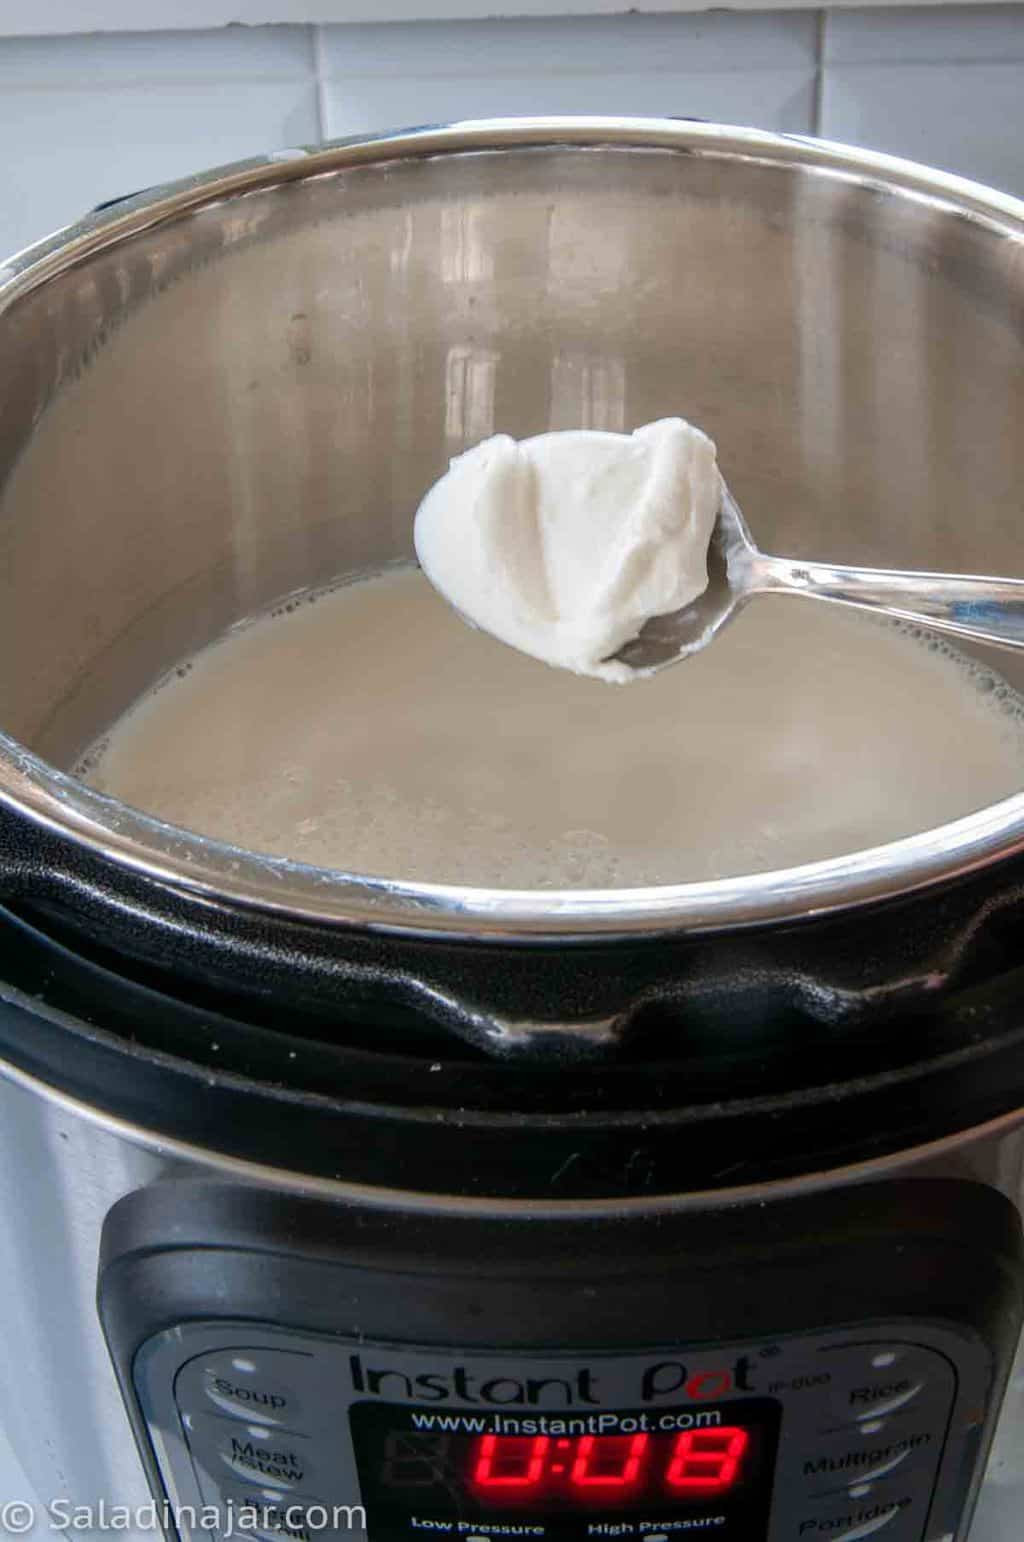 shows two ways to use the an instant pot to incubate yogurt.